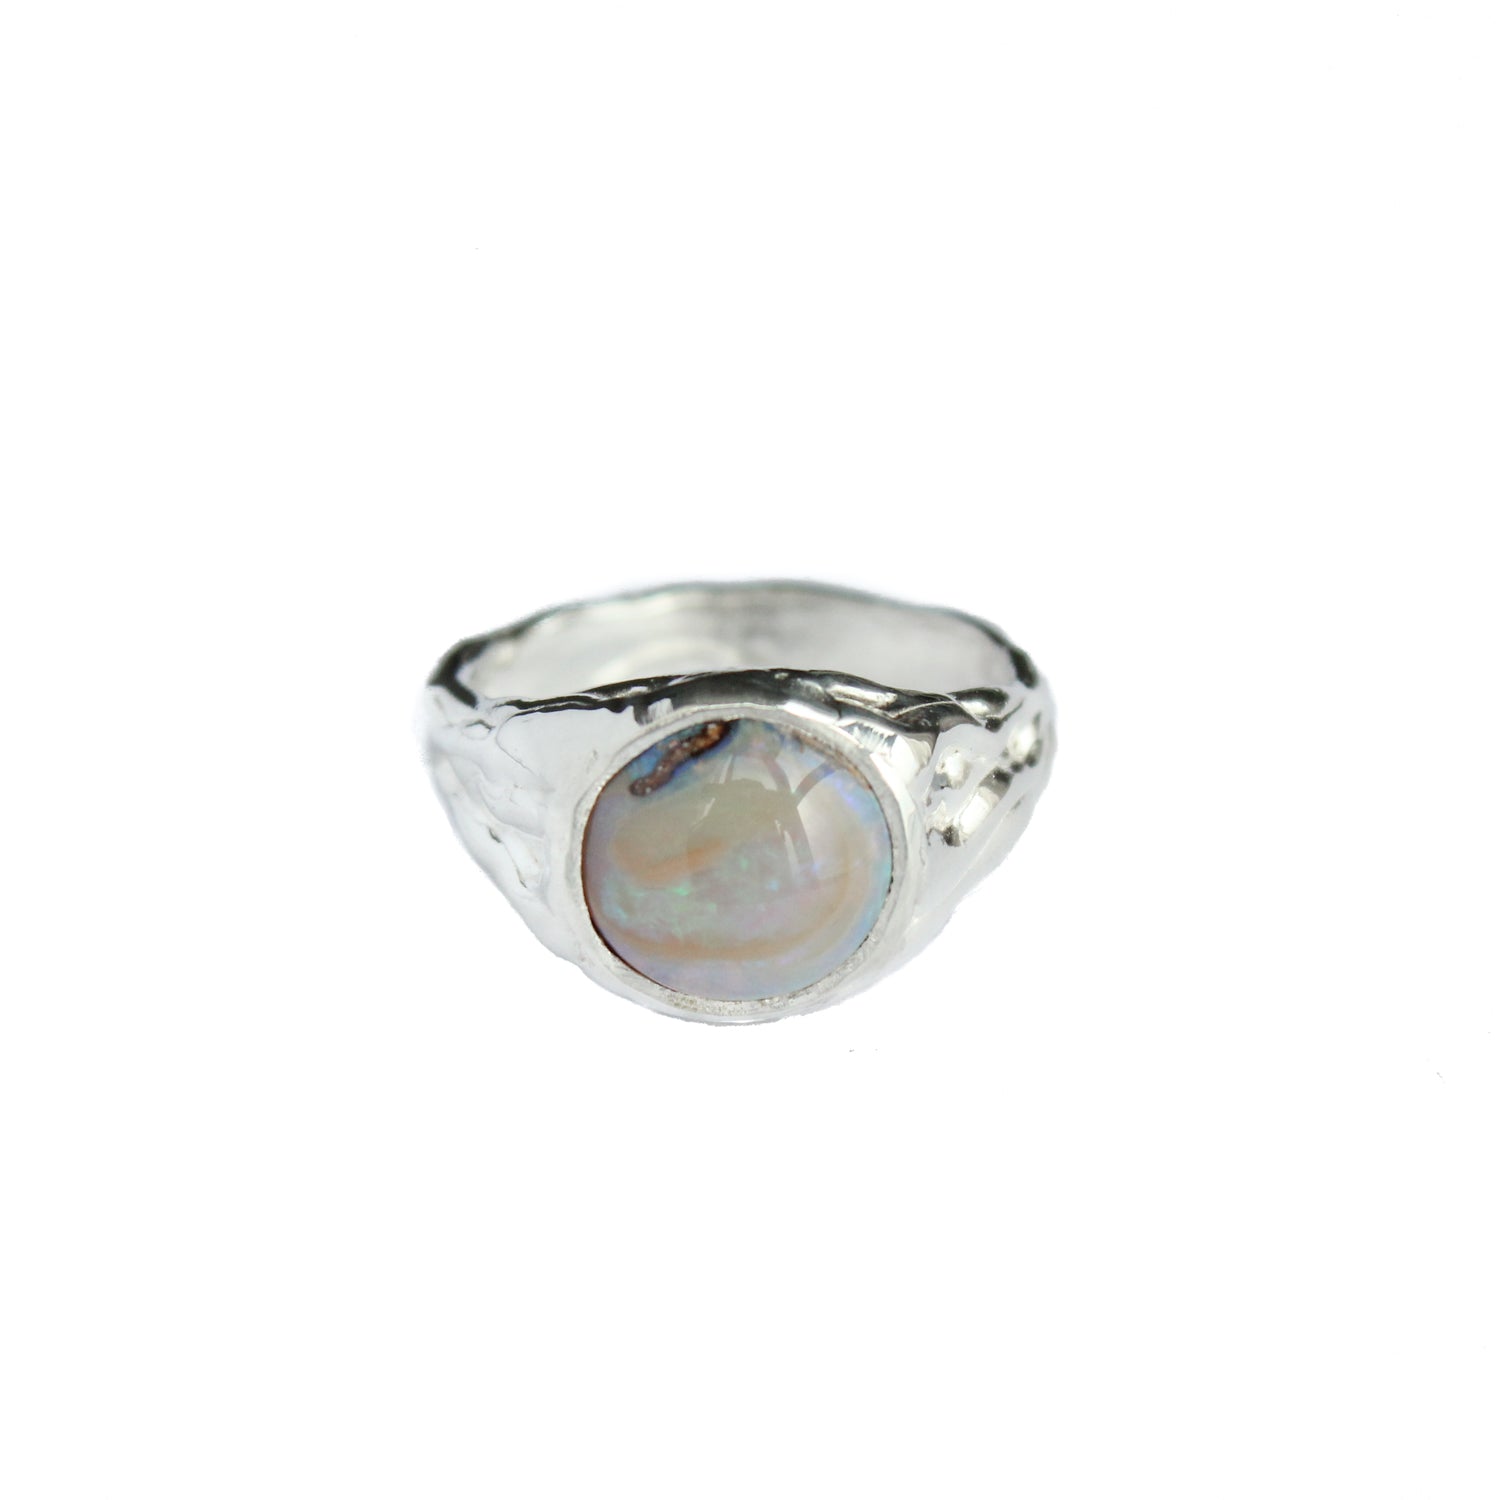 Crystal Ball Ring - Size 7 - Thaleia Jewelry